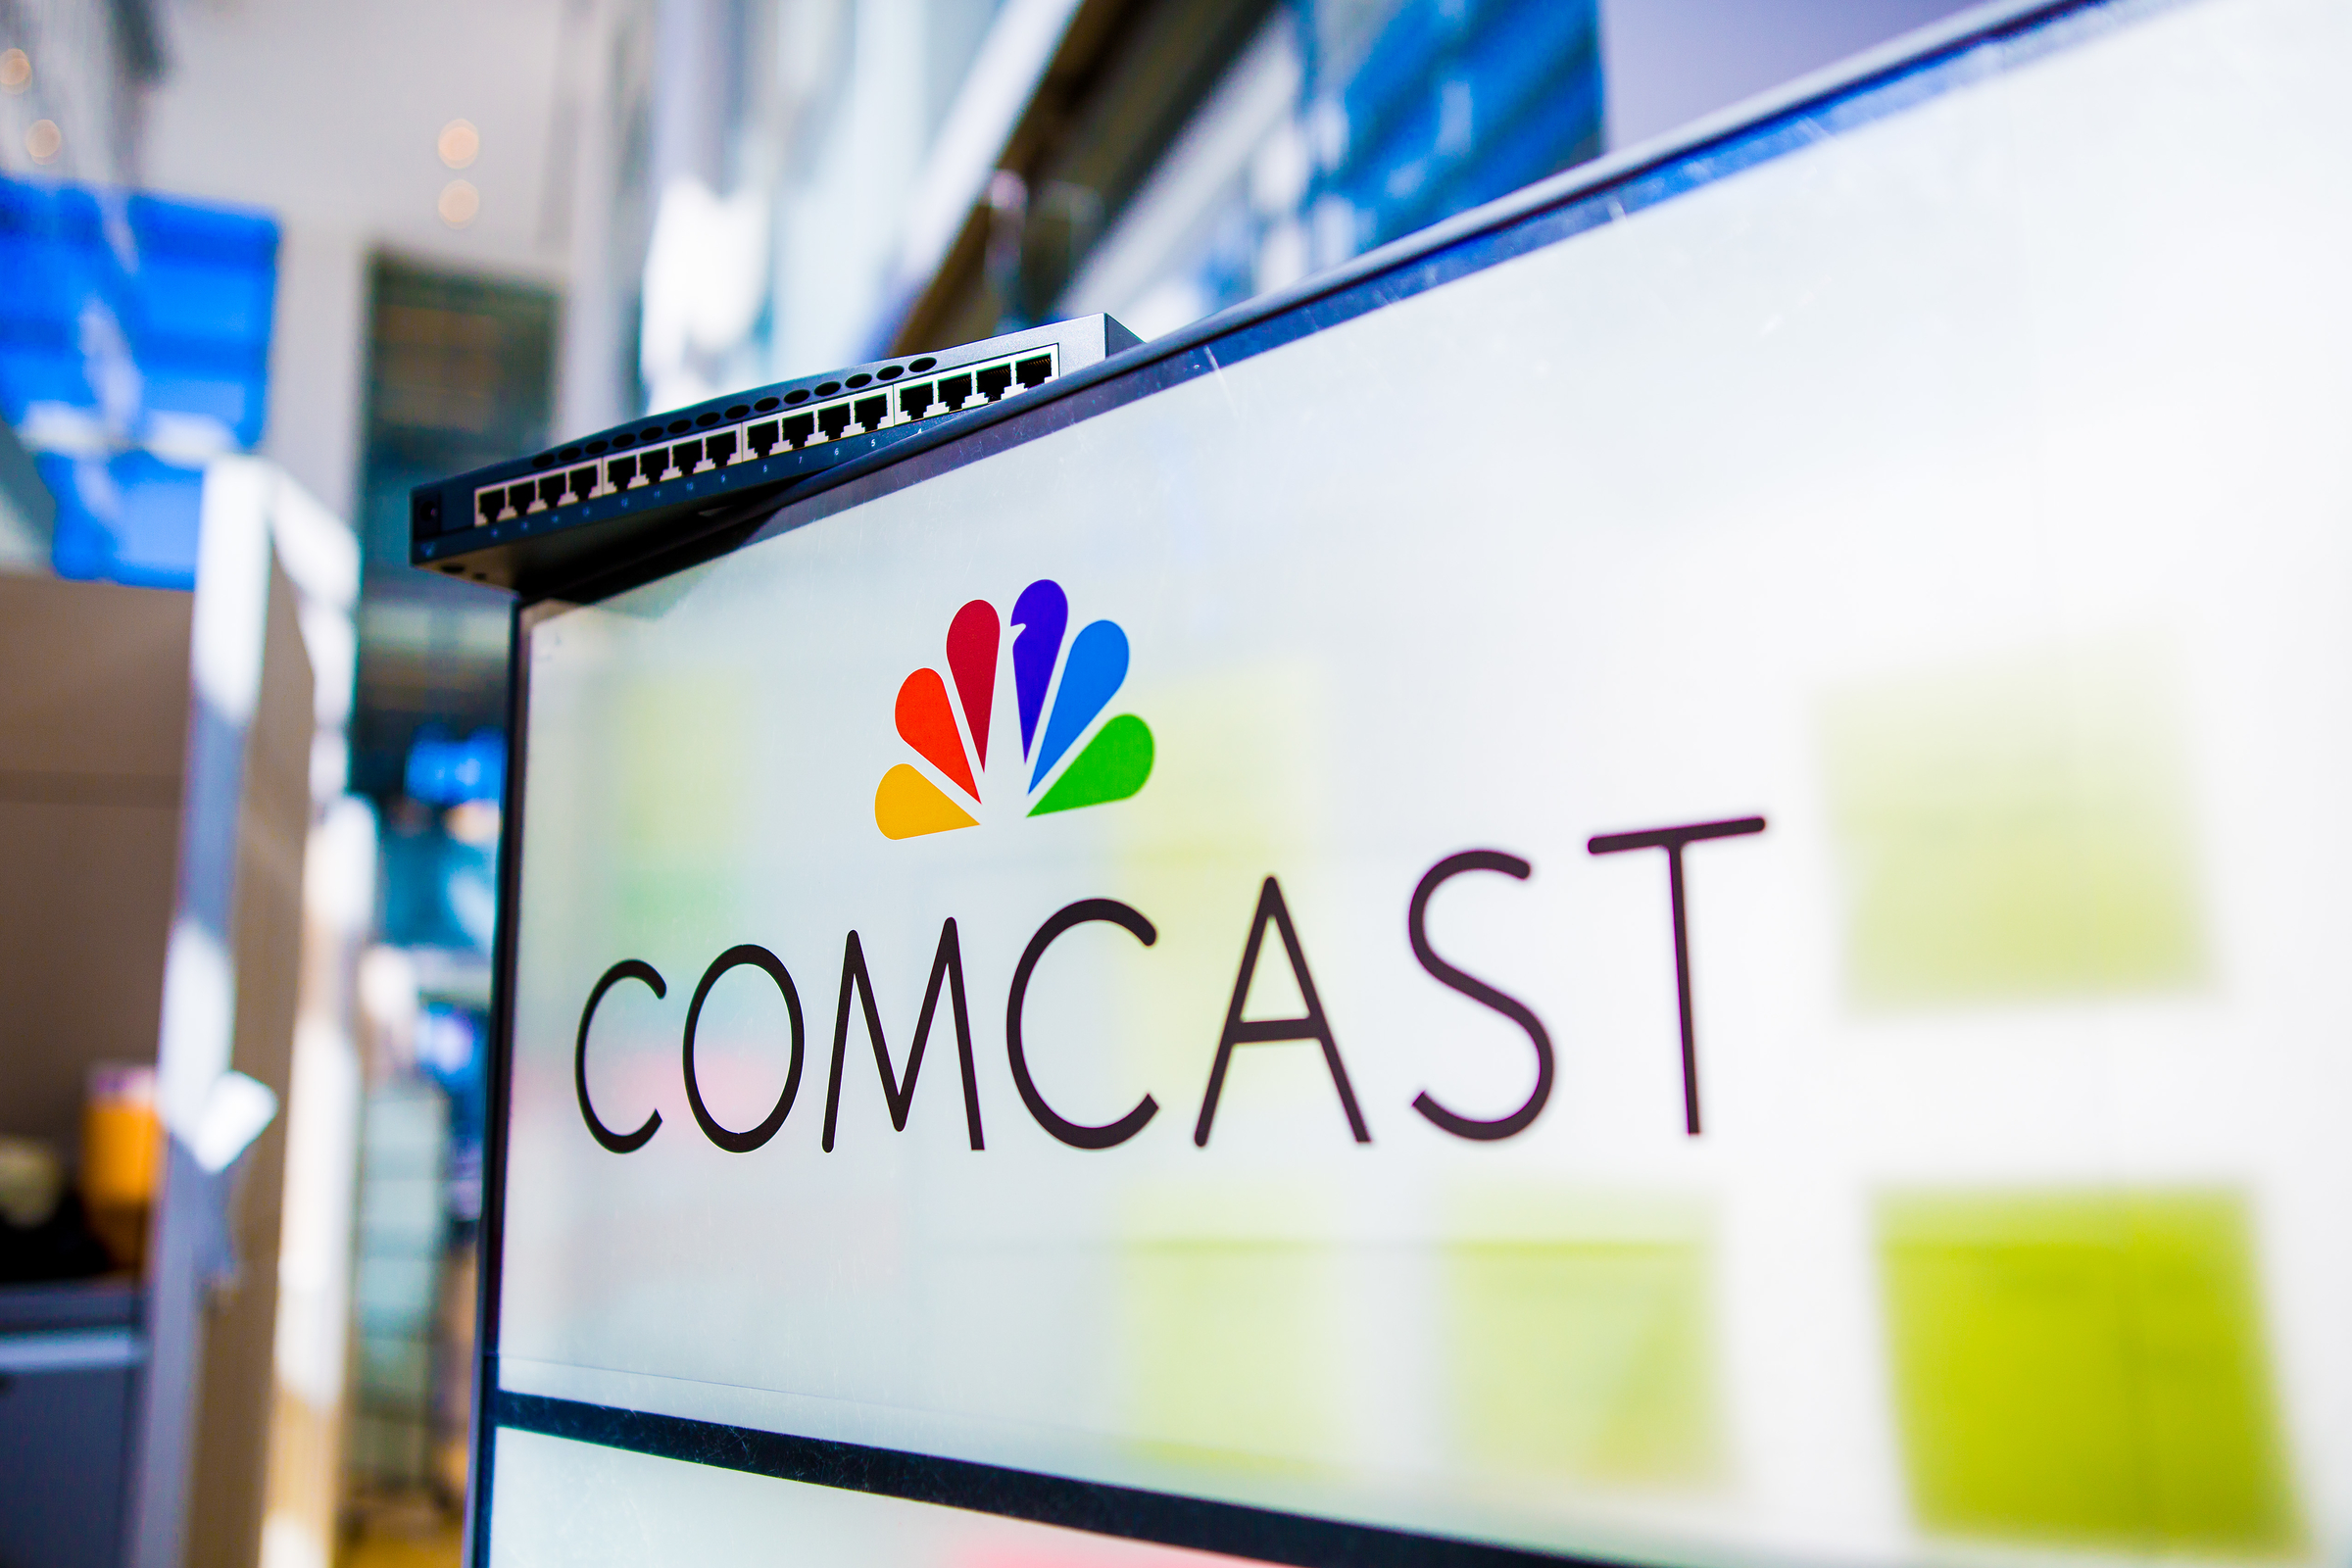 comcast-logo-and-cable-box.jpg